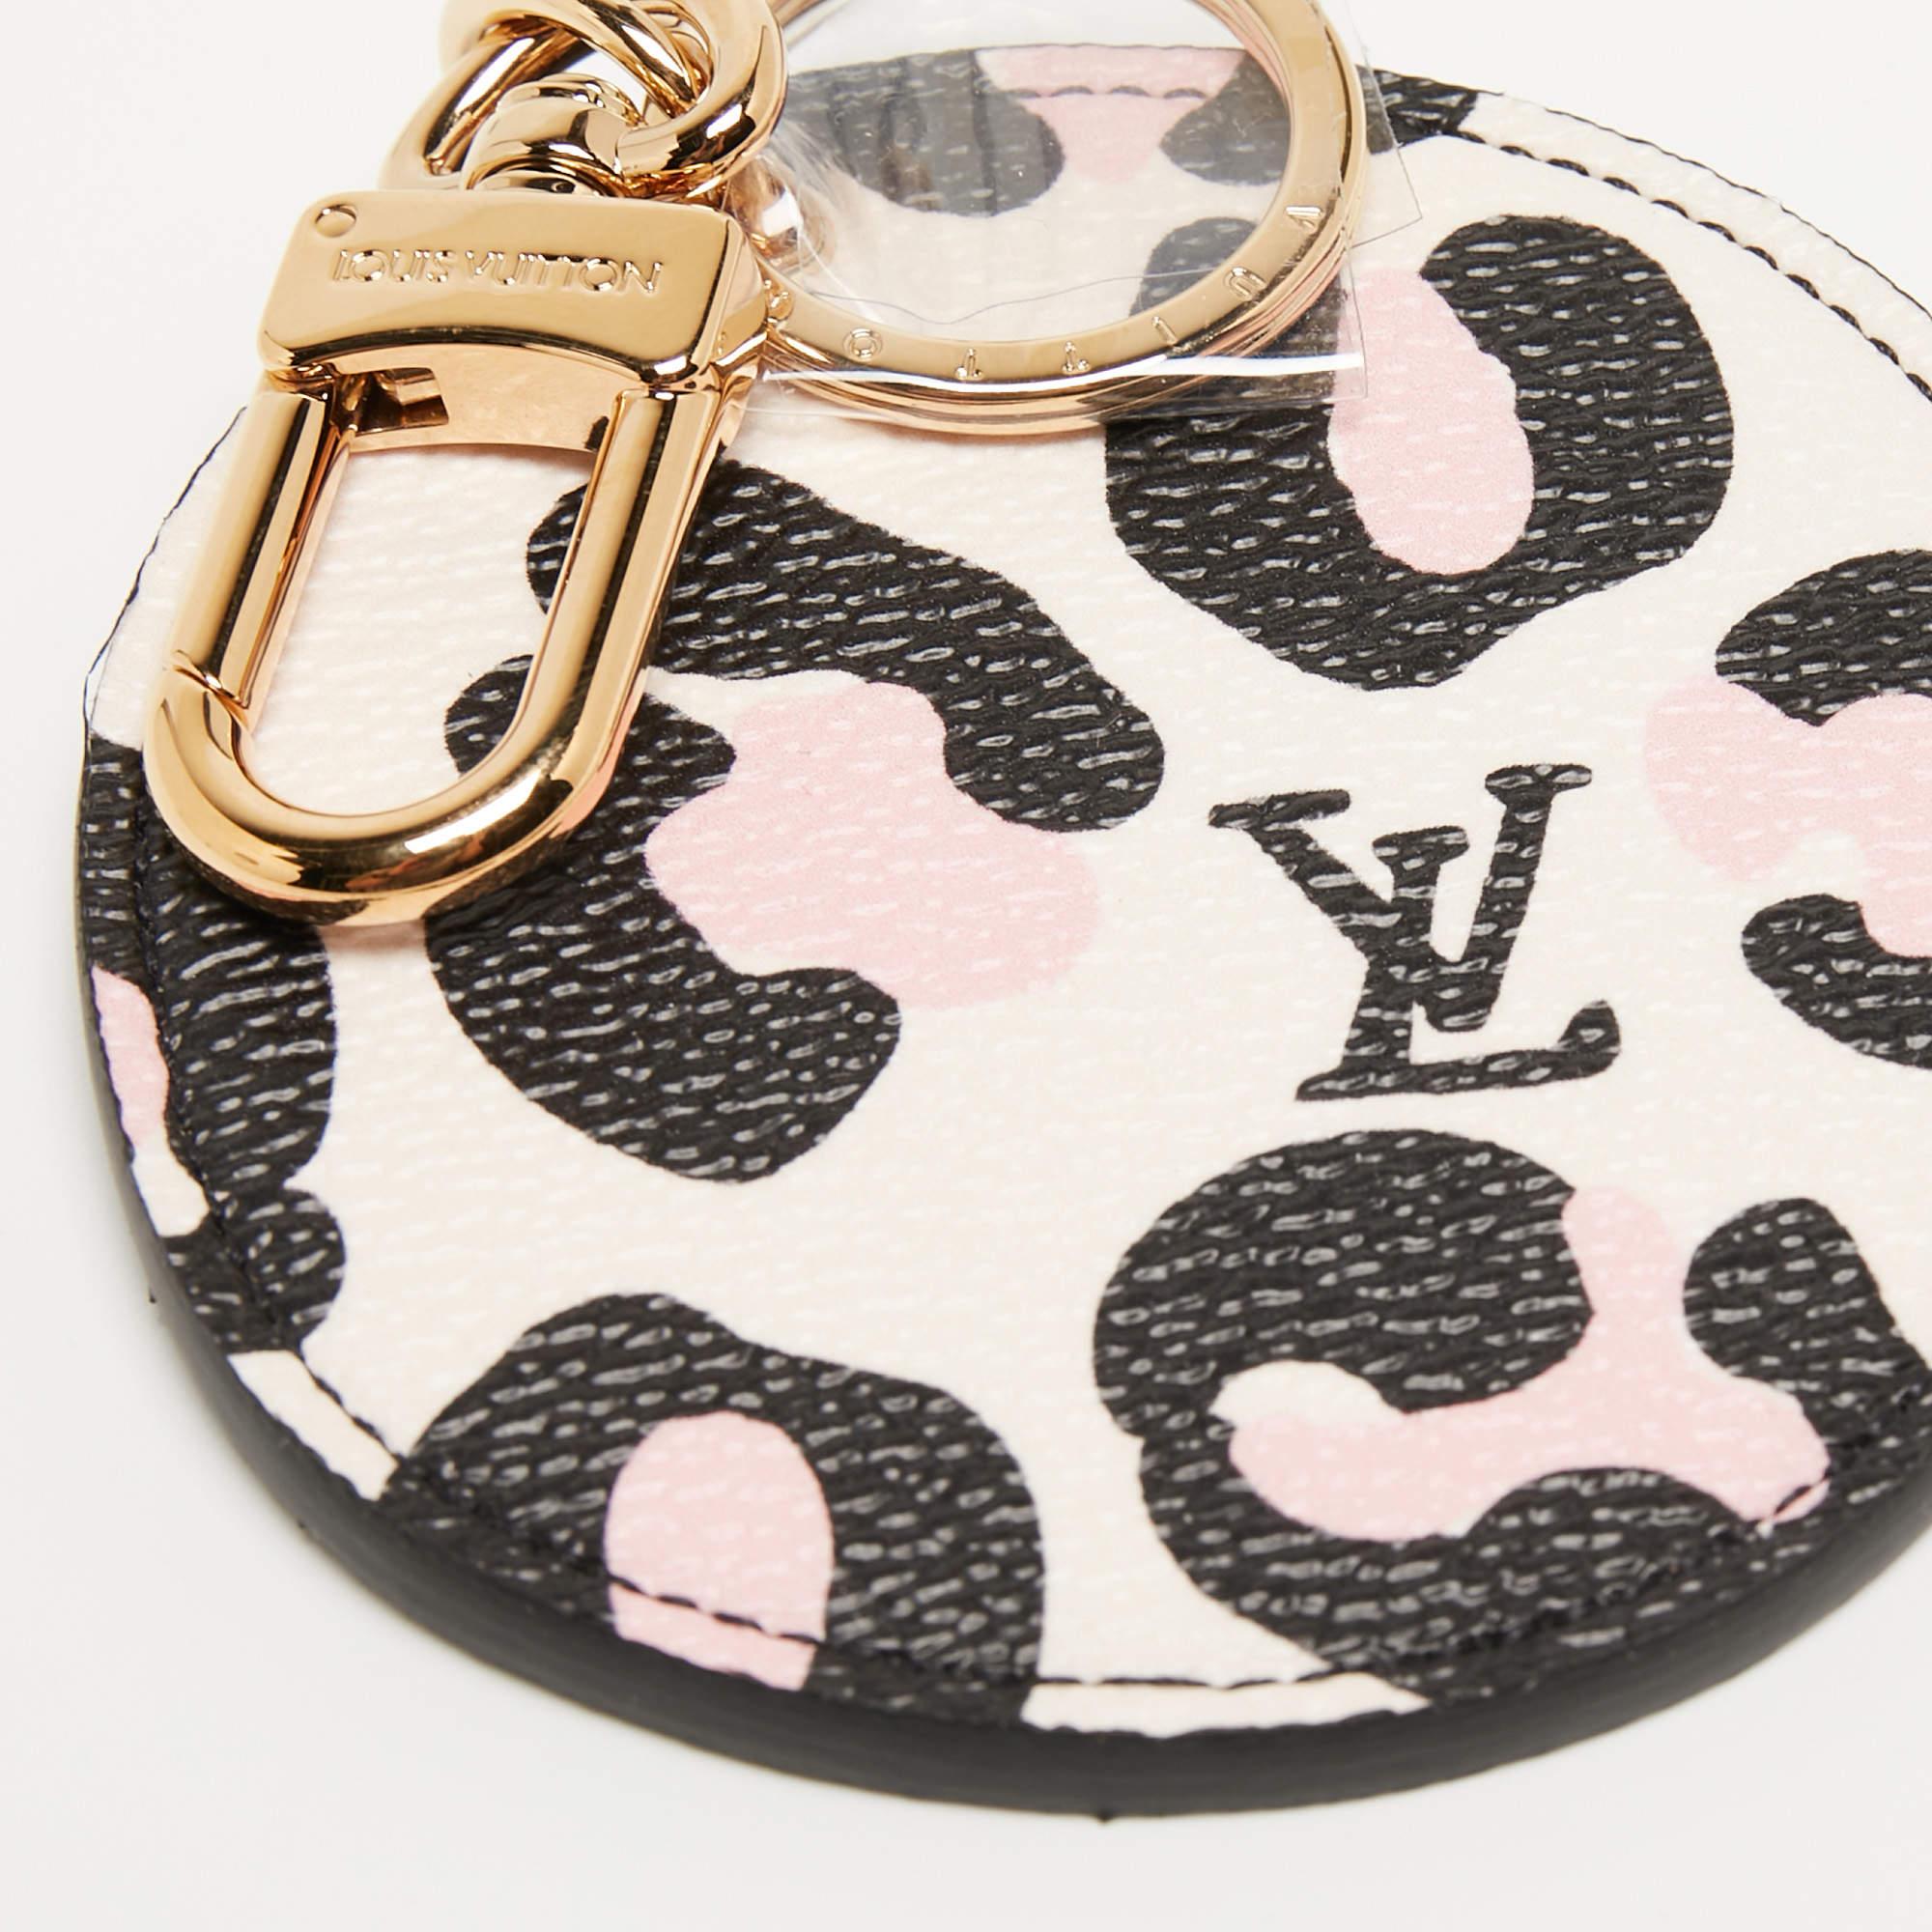 Bag charms offer a playful way to accessorize your designer bags. Made by Louis Vuitton, this creation can also be attached to your key holders, pouches, and bags.

Includes
Original Dustbag